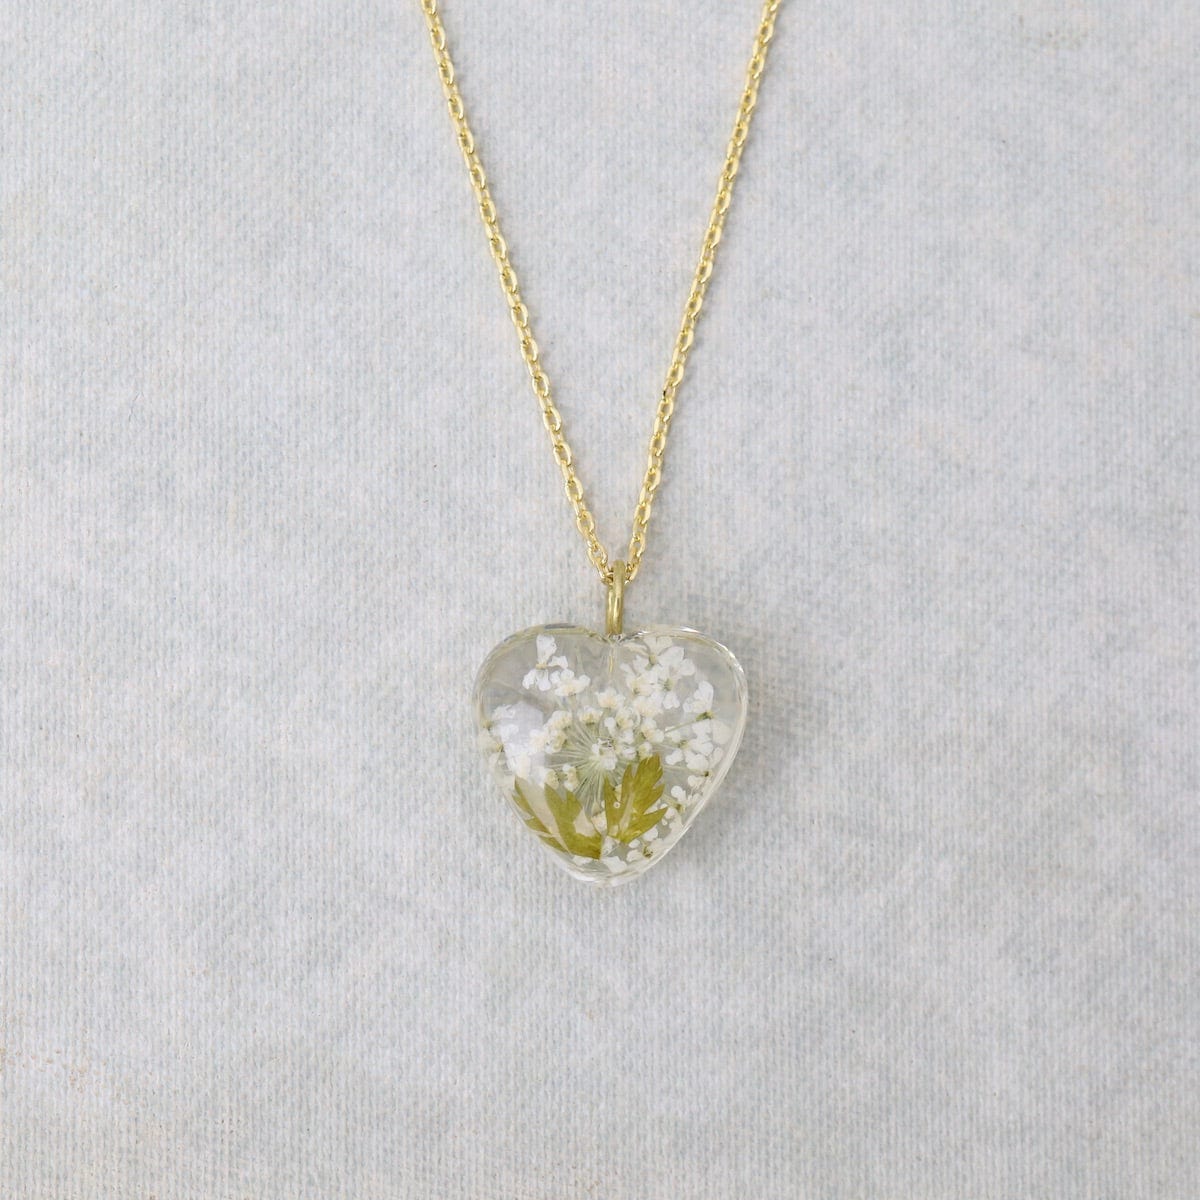 NKL-GPL Botanical Mini Heart Necklace - Hawthorn May Birthday Month